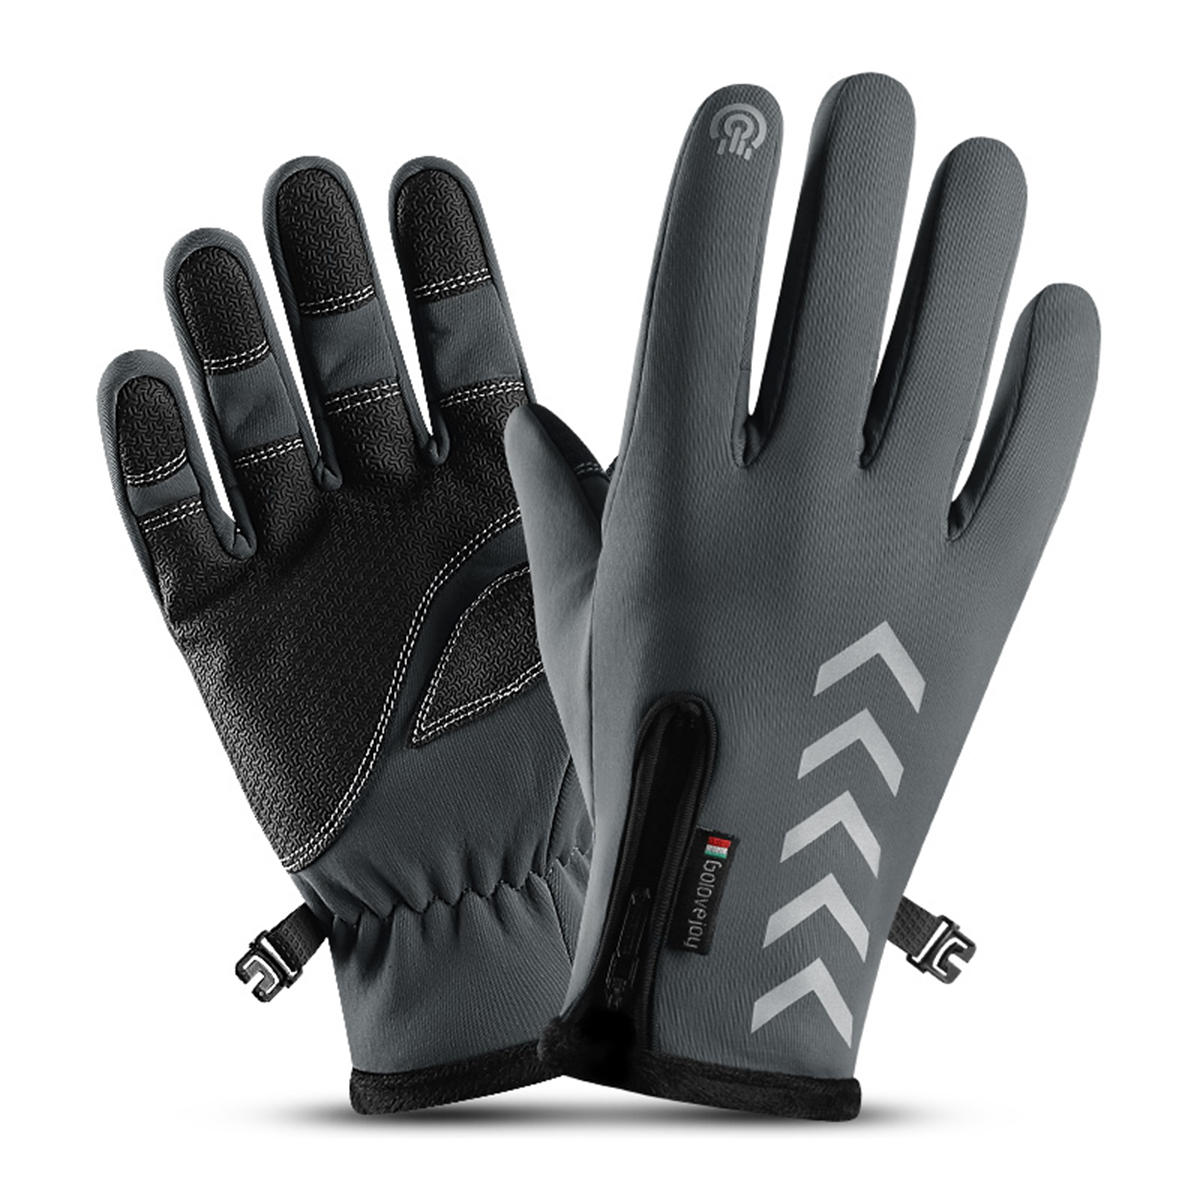 Mens Winter Thermal Fleece Lined Gloves Touchscreen Waterproof Windproof Reflective Skiing Cycling Warm Mitten